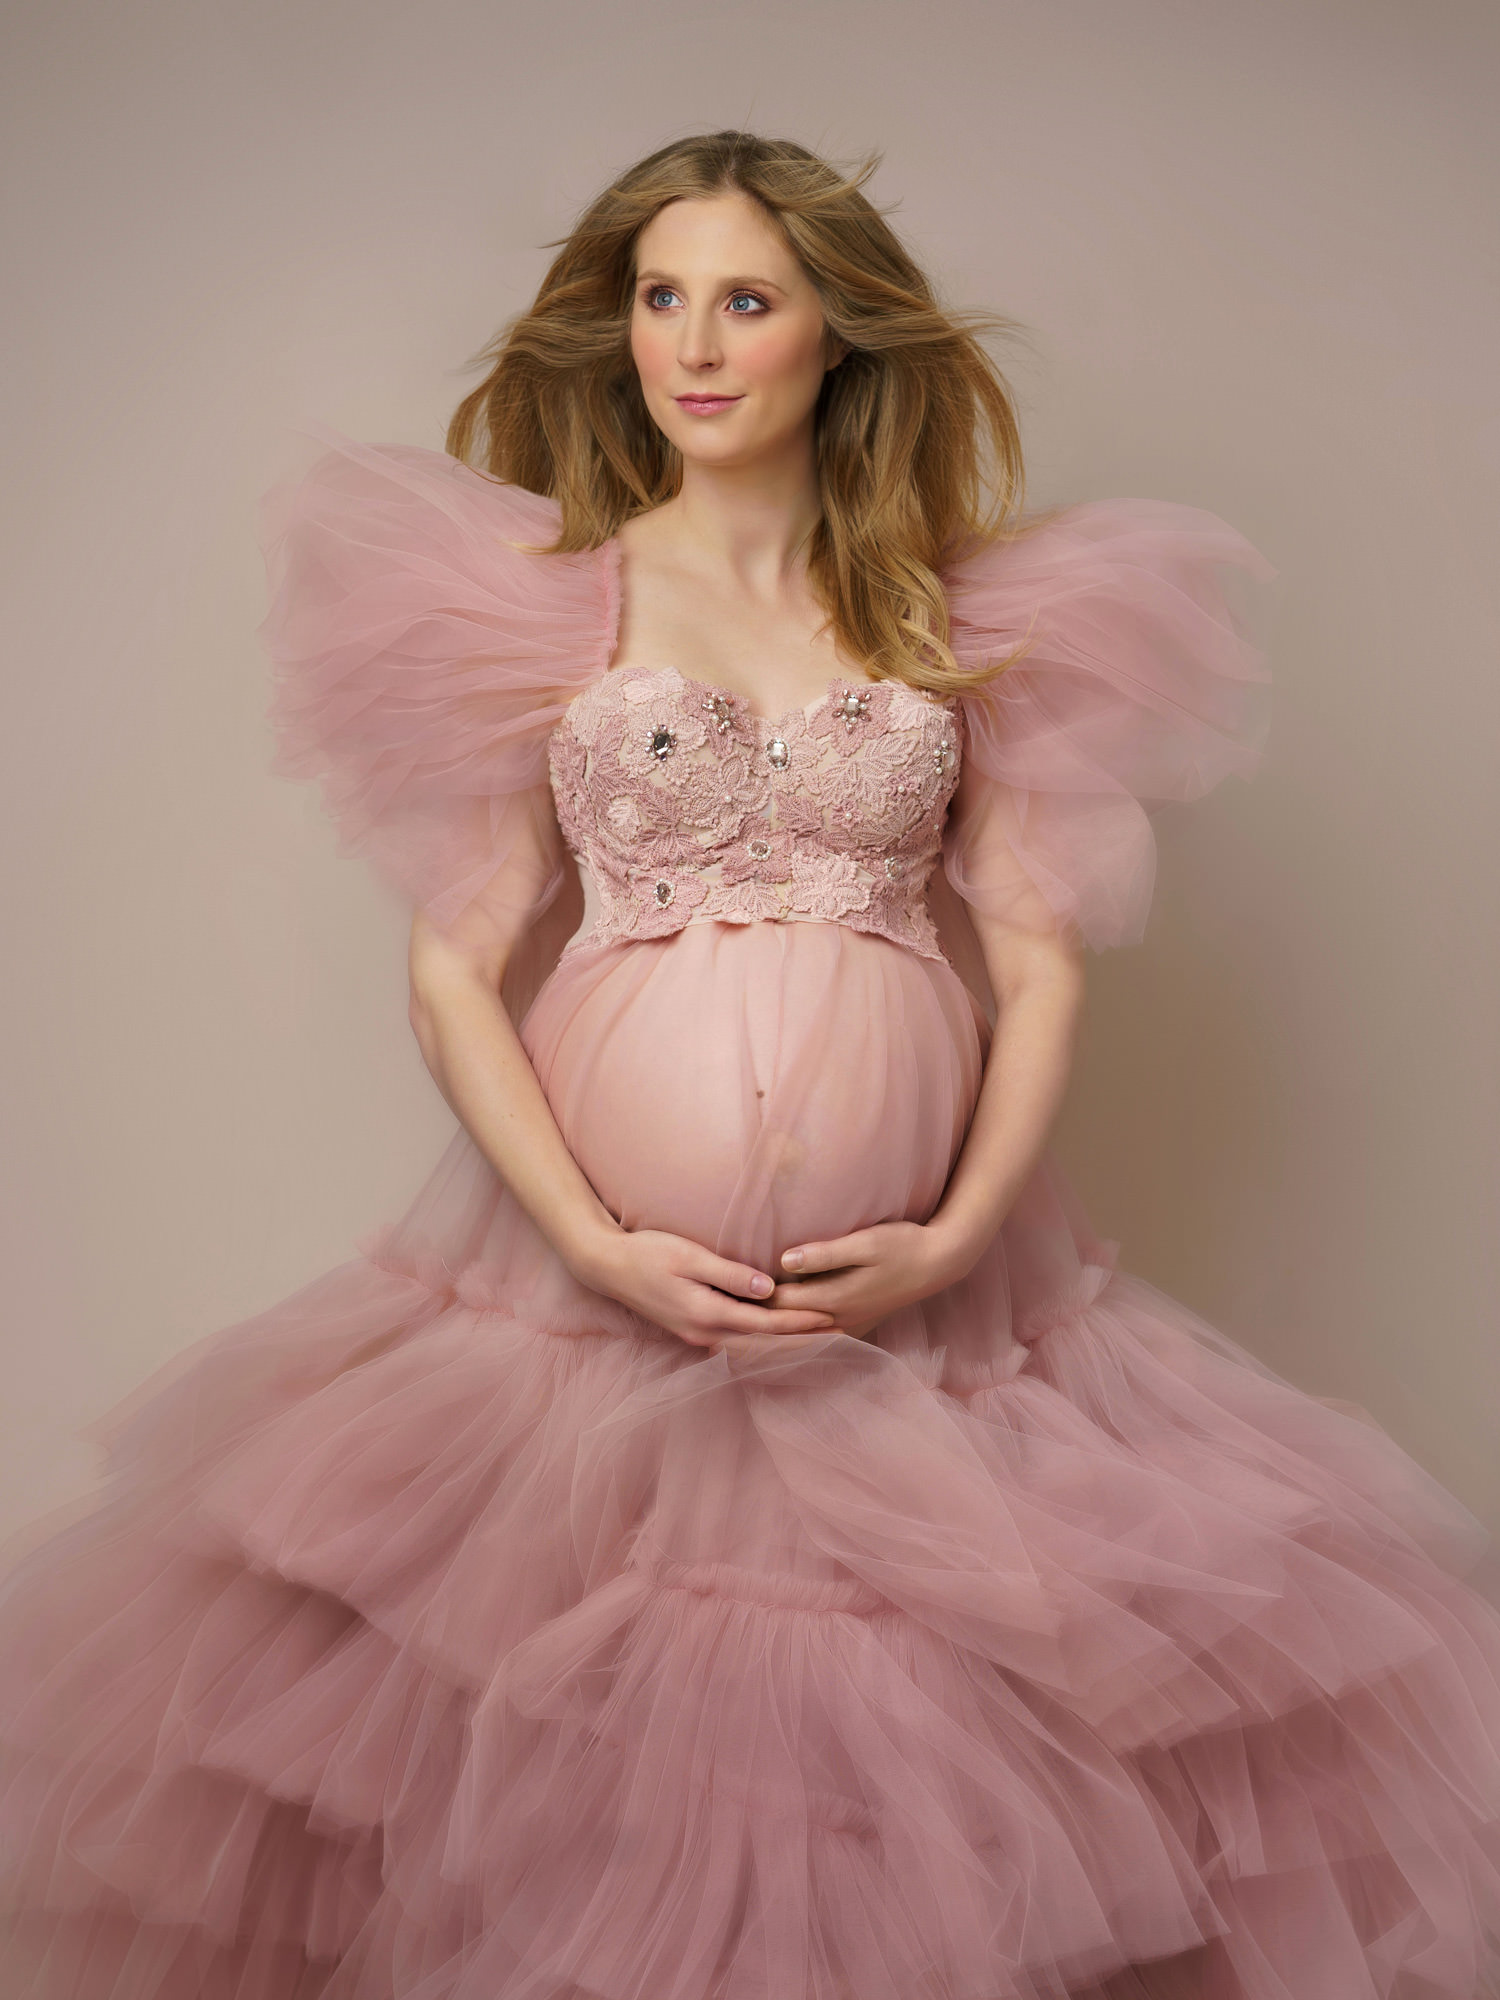 pregnant woman in pink frilly dress with hands under her baby bump by maternity photographer in Surrey